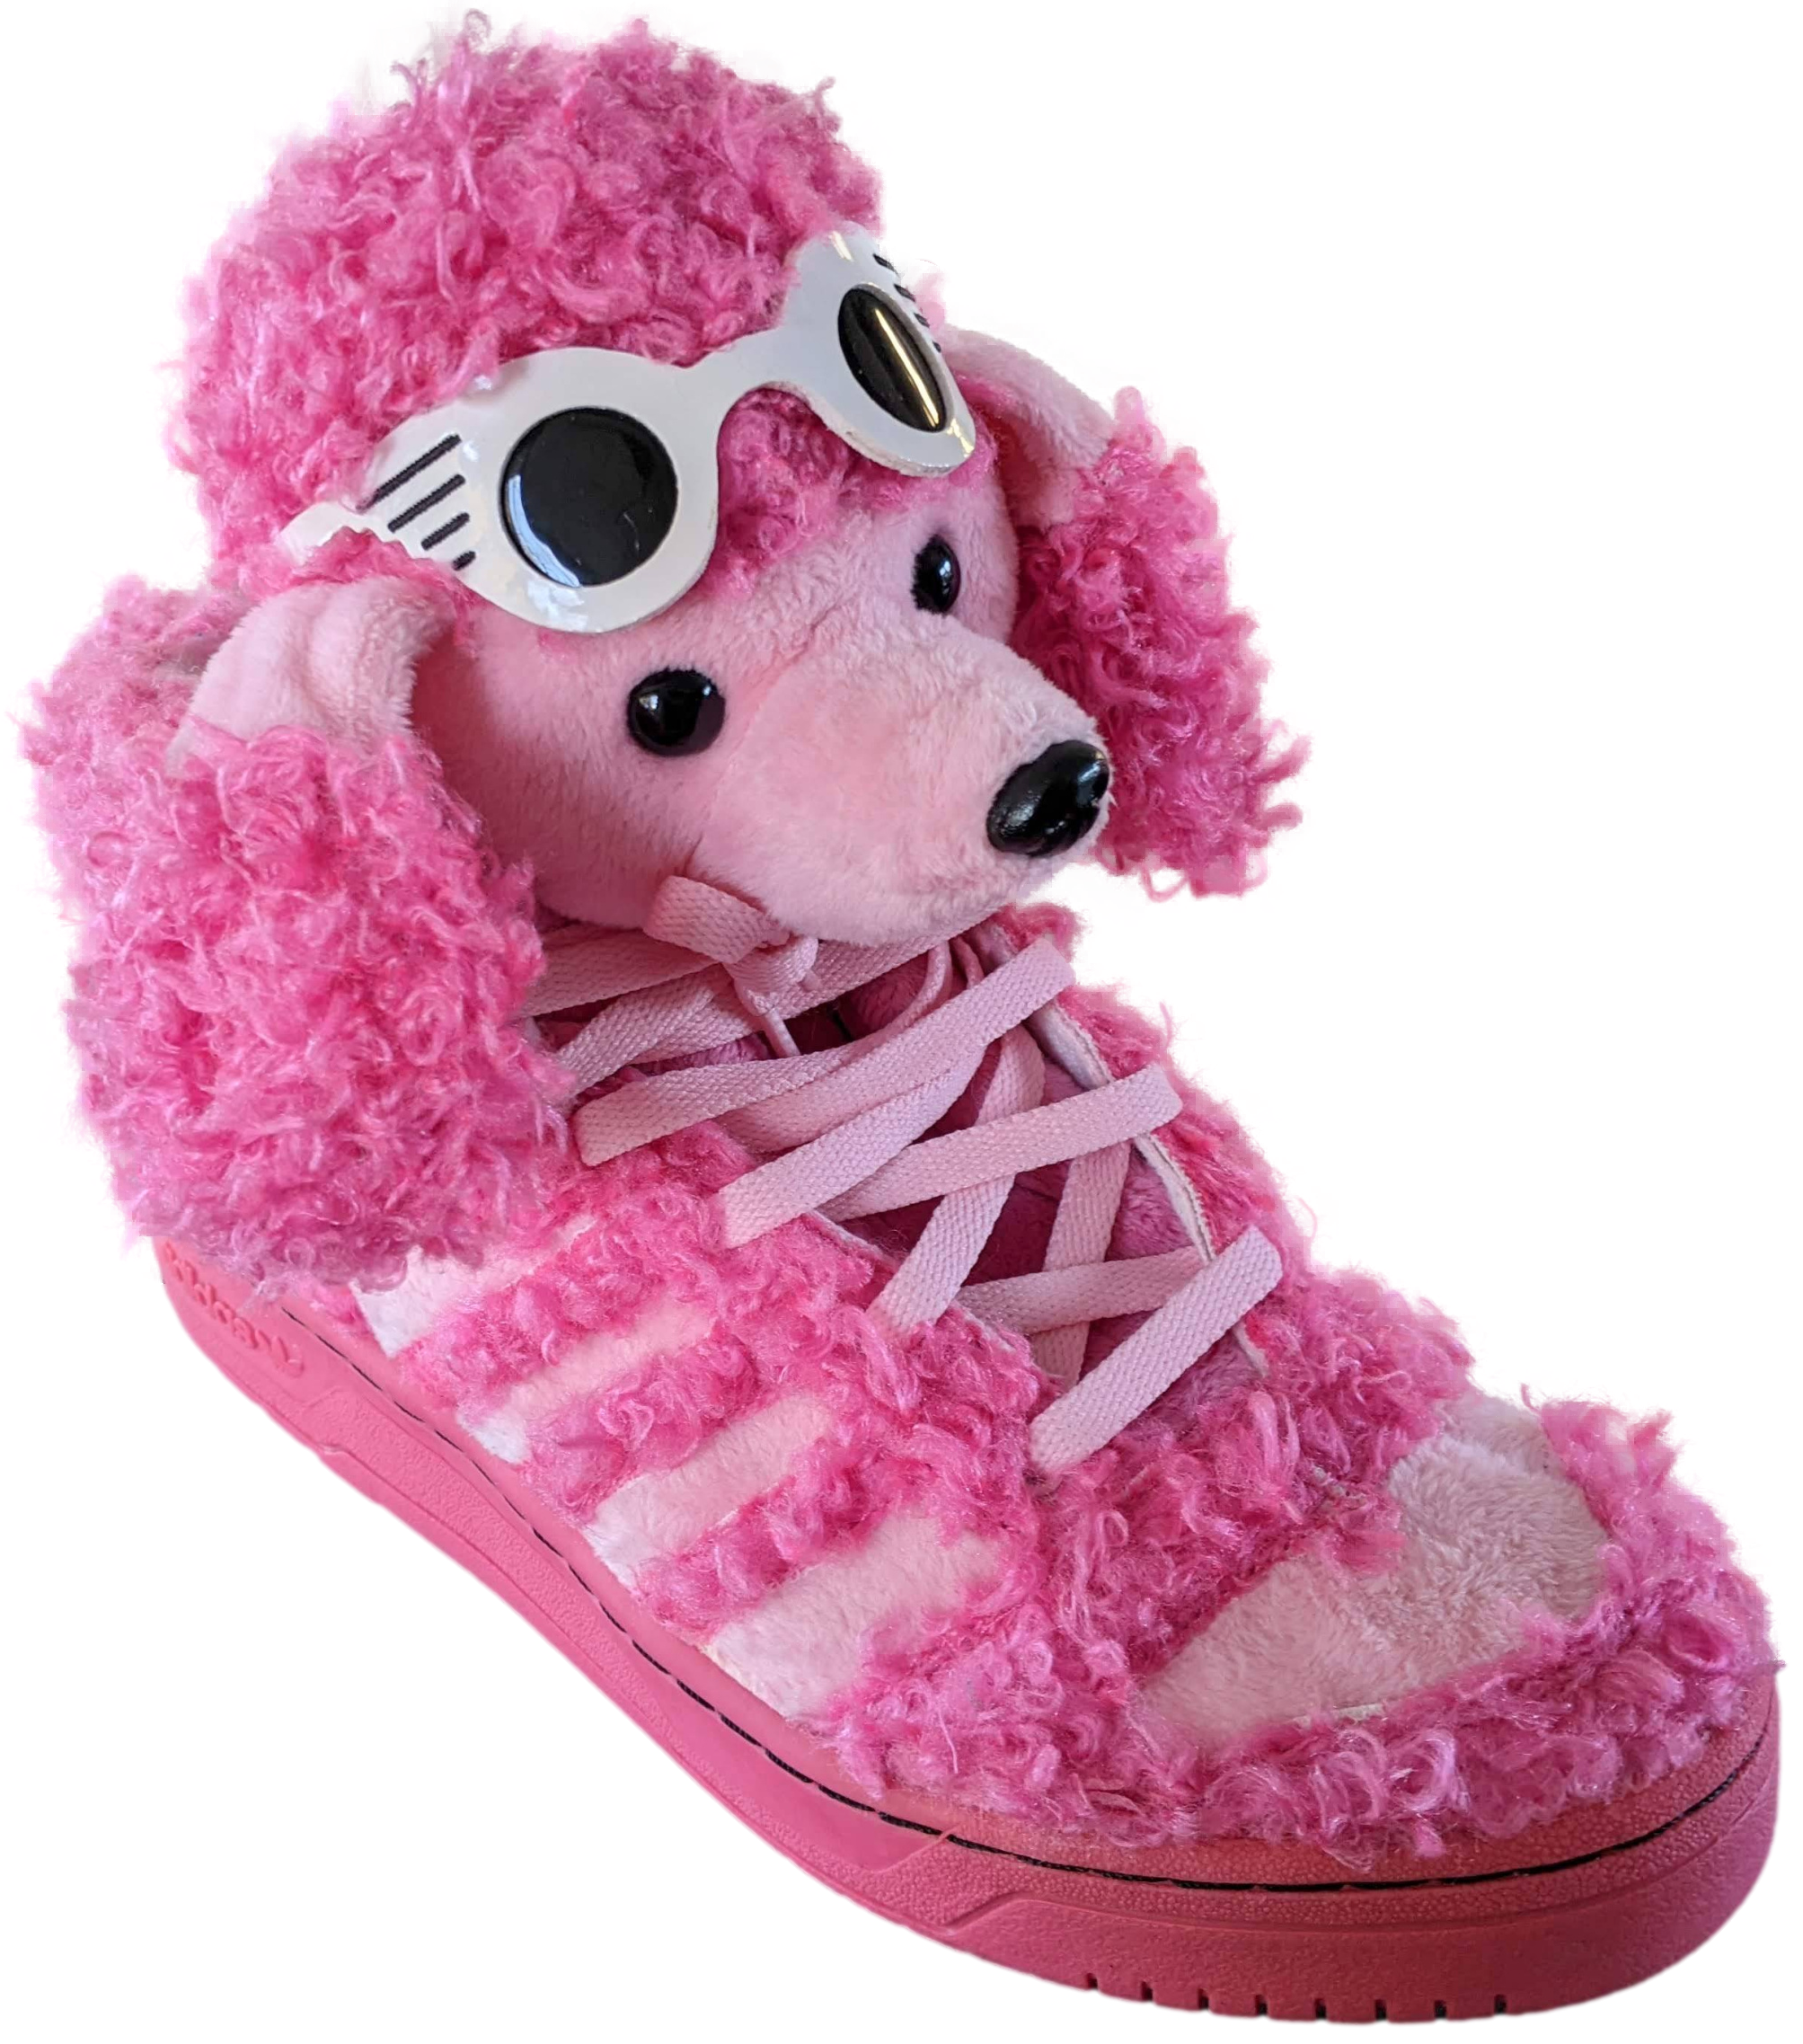 Adidas & Jeremy Scott's 12/13 Pink " Poodle " Trainer Teddy Sneakers Shoes, RARE! |